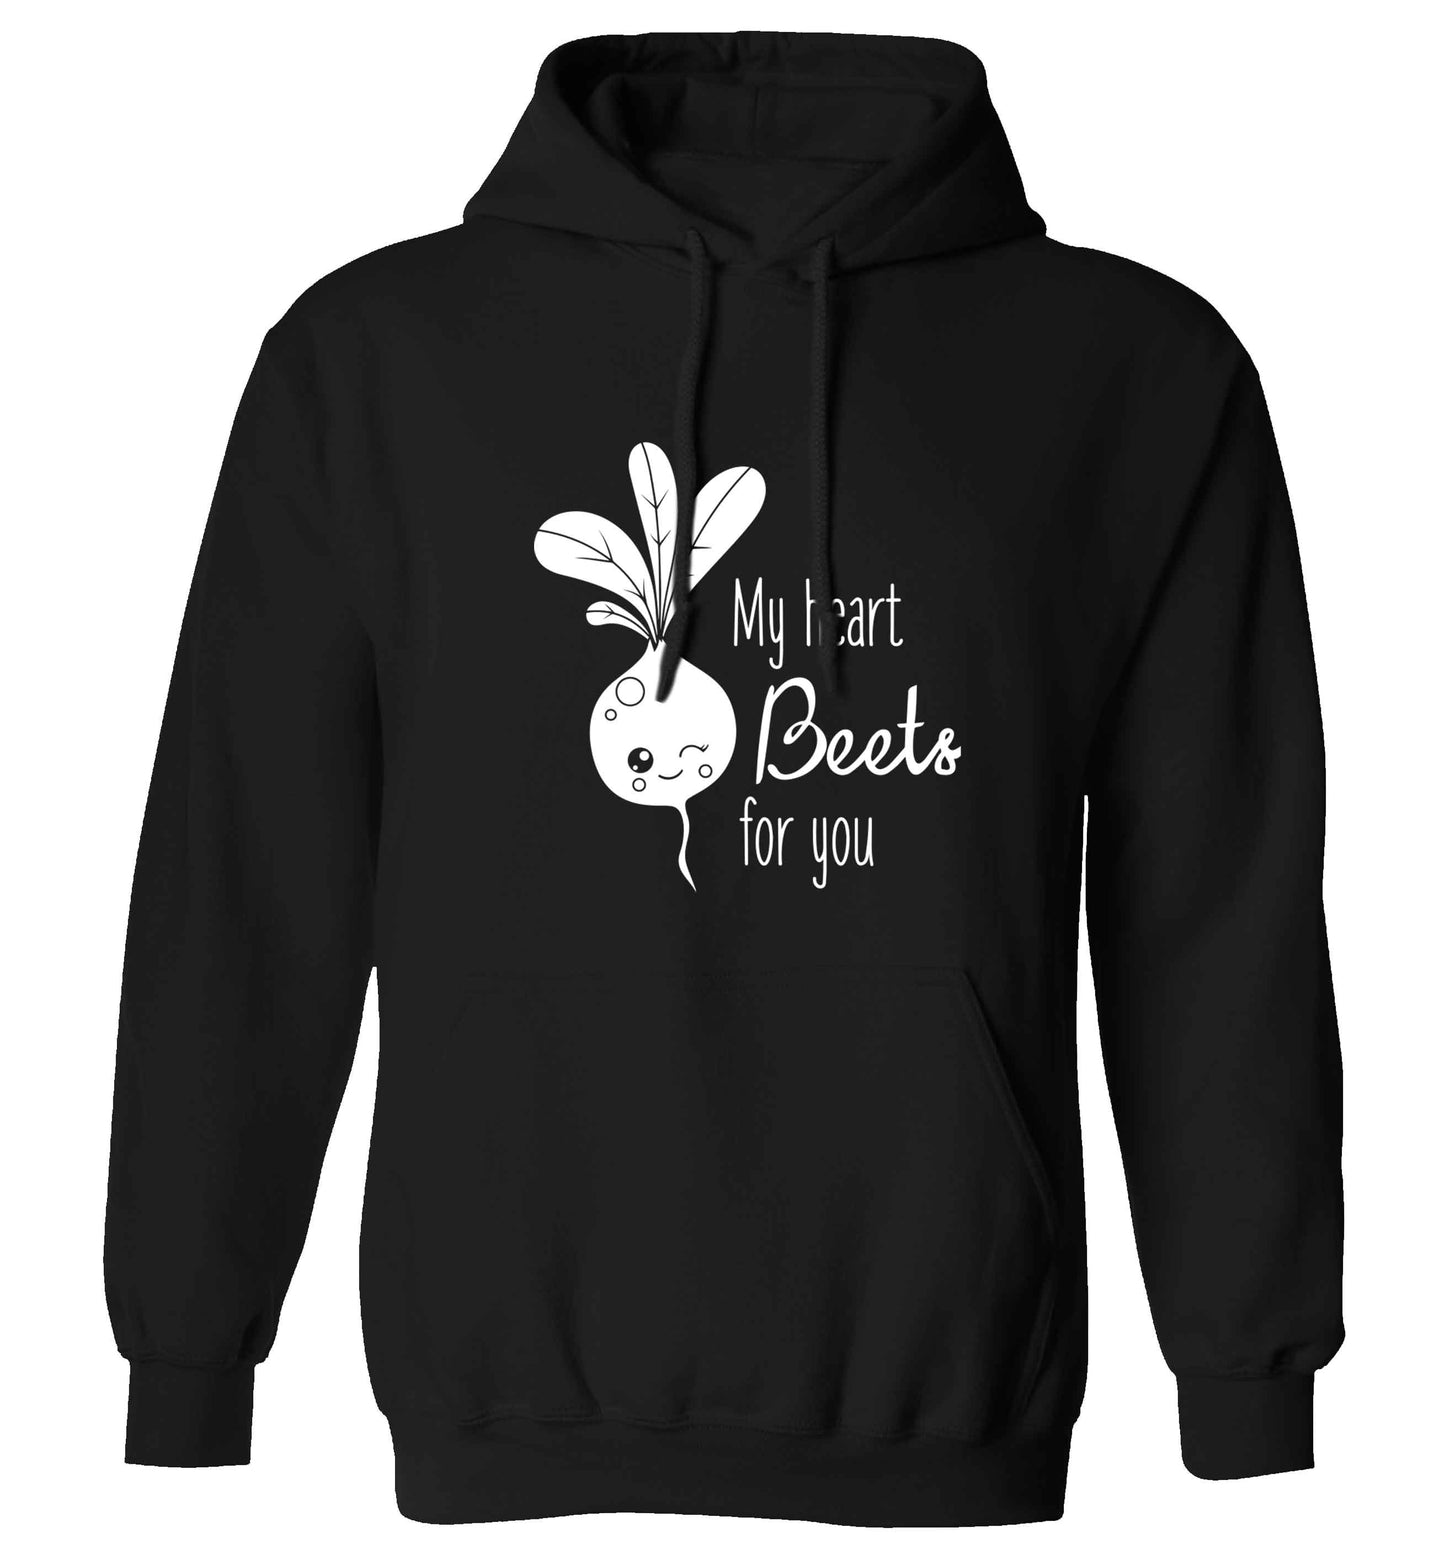 My heart beets for you adults unisex black hoodie 2XL